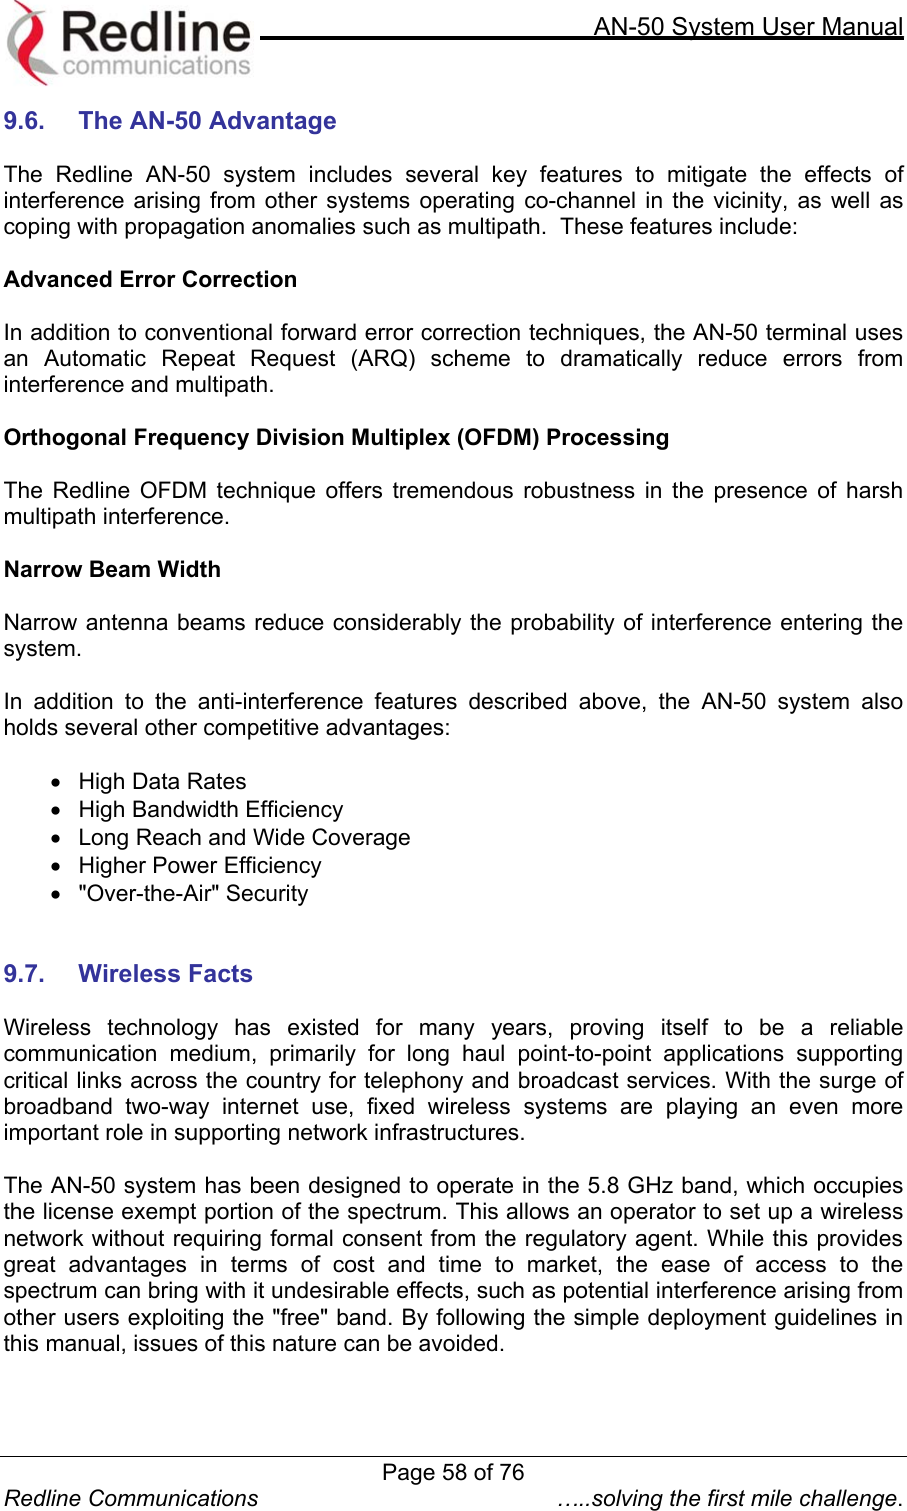     AN-50 System User Manual  Redline Communications  …..solving the first mile challenge. 9.6.  The AN-50 Advantage  The Redline AN-50 system includes several key features to mitigate the effects of interference arising from other systems operating co-channel in the vicinity, as well as coping with propagation anomalies such as multipath.  These features include:  Advanced Error Correction   In addition to conventional forward error correction techniques, the AN-50 terminal uses an Automatic Repeat Request (ARQ) scheme to dramatically reduce errors from interference and multipath.  Orthogonal Frequency Division Multiplex (OFDM) Processing  The Redline OFDM technique offers tremendous robustness in the presence of harsh multipath interference.  Narrow Beam Width  Narrow antenna beams reduce considerably the probability of interference entering the system.  In addition to the anti-interference features described above, the AN-50 system also holds several other competitive advantages:  •  High Data Rates  •  High Bandwidth Efficiency  •  Long Reach and Wide Coverage •  Higher Power Efficiency •  &quot;Over-the-Air&quot; Security   9.7. Wireless Facts  Wireless technology has existed for many years, proving itself to be a reliable communication medium, primarily for long haul point-to-point applications supporting critical links across the country for telephony and broadcast services. With the surge of broadband two-way internet use, fixed wireless systems are playing an even more important role in supporting network infrastructures.      The AN-50 system has been designed to operate in the 5.8 GHz band, which occupies the license exempt portion of the spectrum. This allows an operator to set up a wireless network without requiring formal consent from the regulatory agent. While this provides great advantages in terms of cost and time to market, the ease of access to the spectrum can bring with it undesirable effects, such as potential interference arising from other users exploiting the &quot;free&quot; band. By following the simple deployment guidelines in this manual, issues of this nature can be avoided.   Page 58 of 76